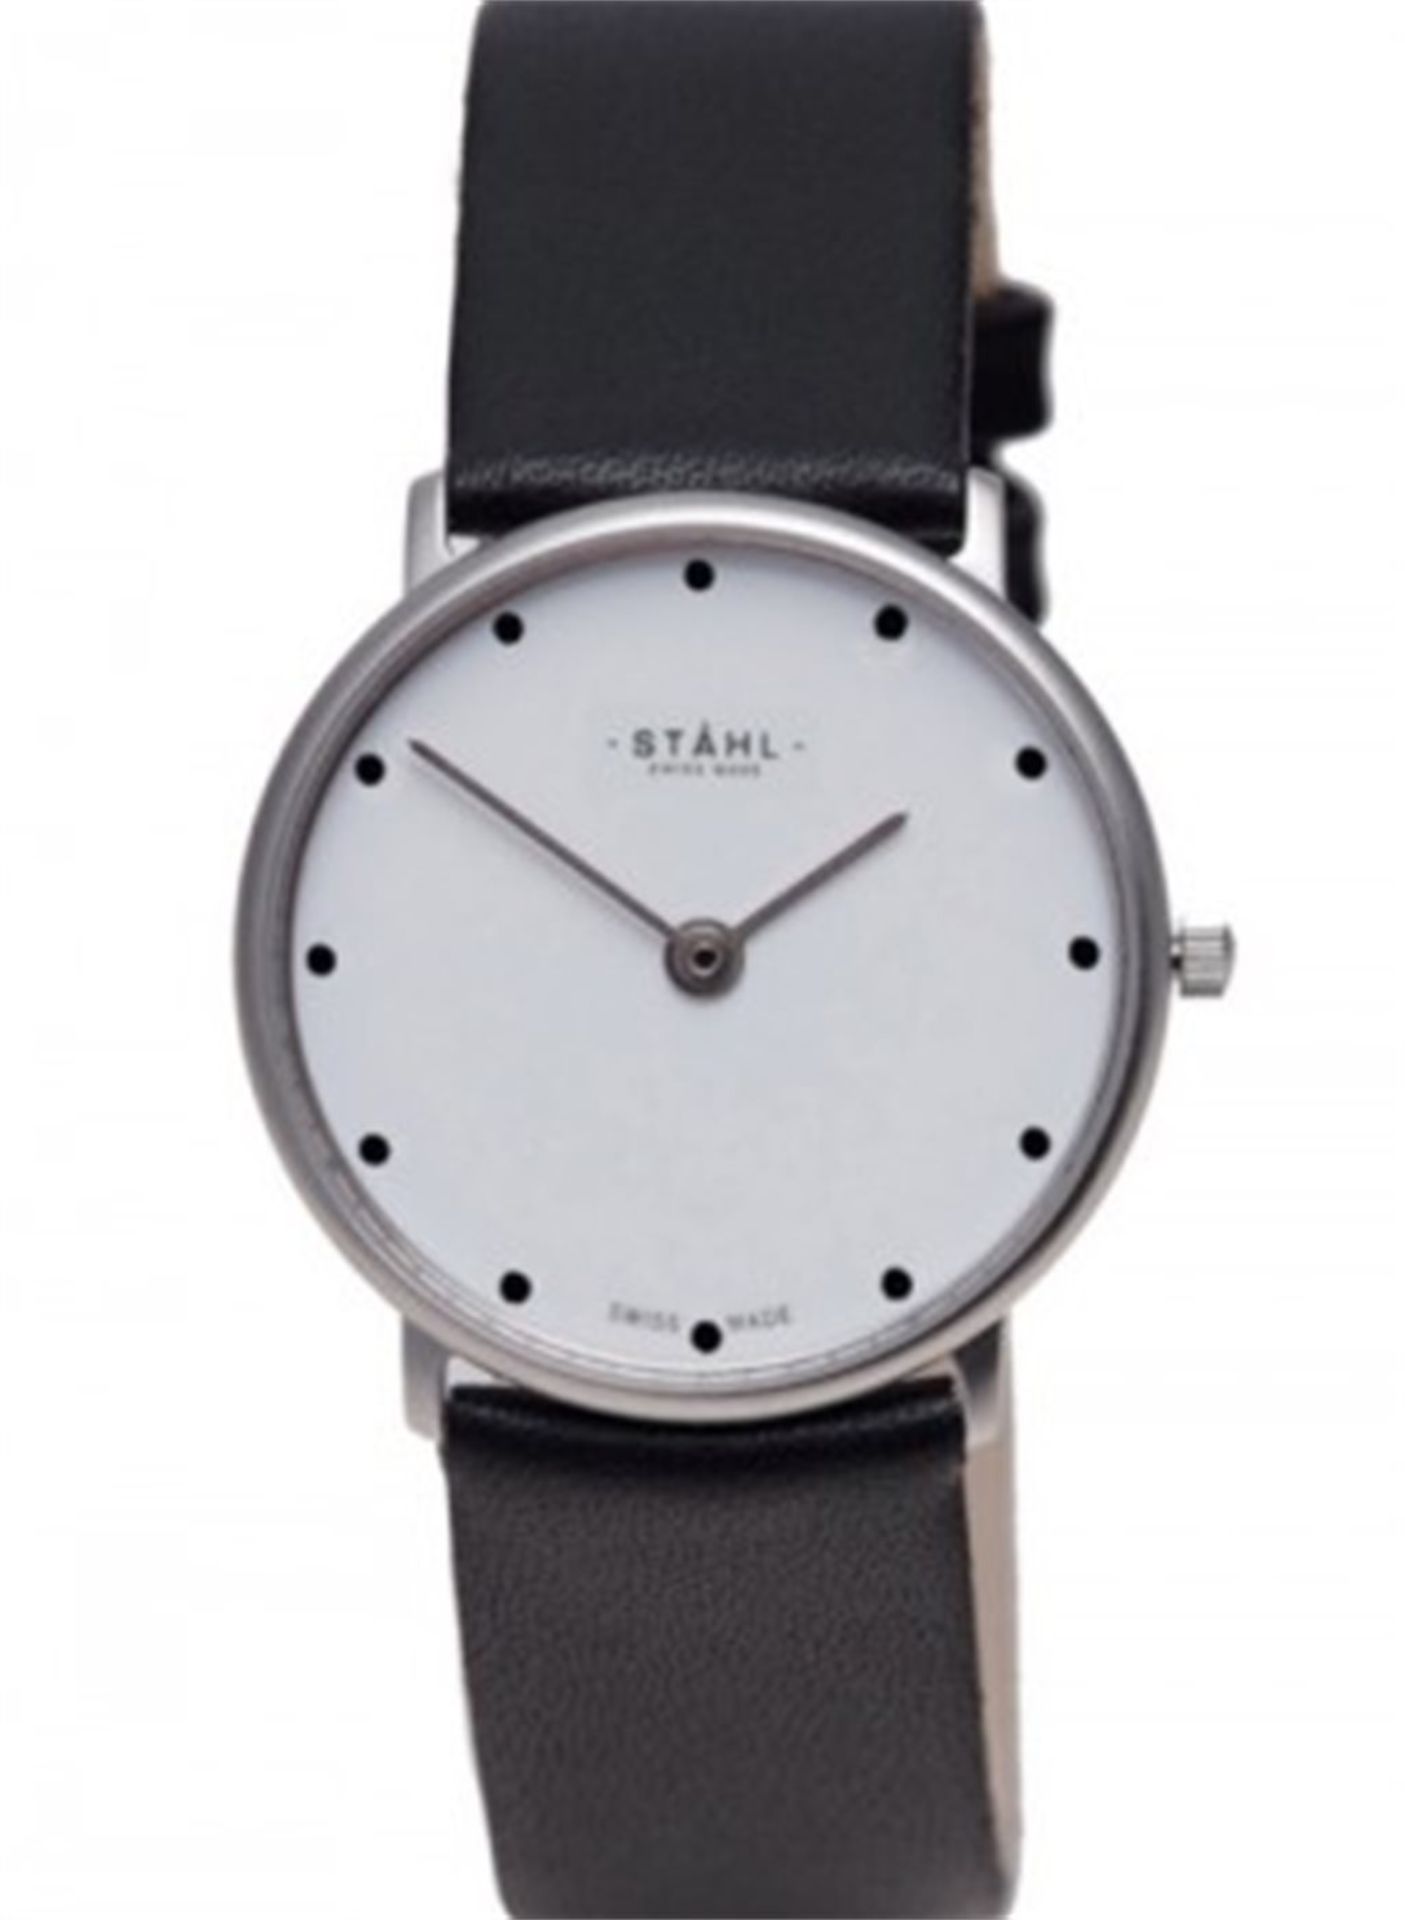 Stahl ST61316 Brushed Stainless Steel Watch with Small White 12 Dots - Image 3 of 3